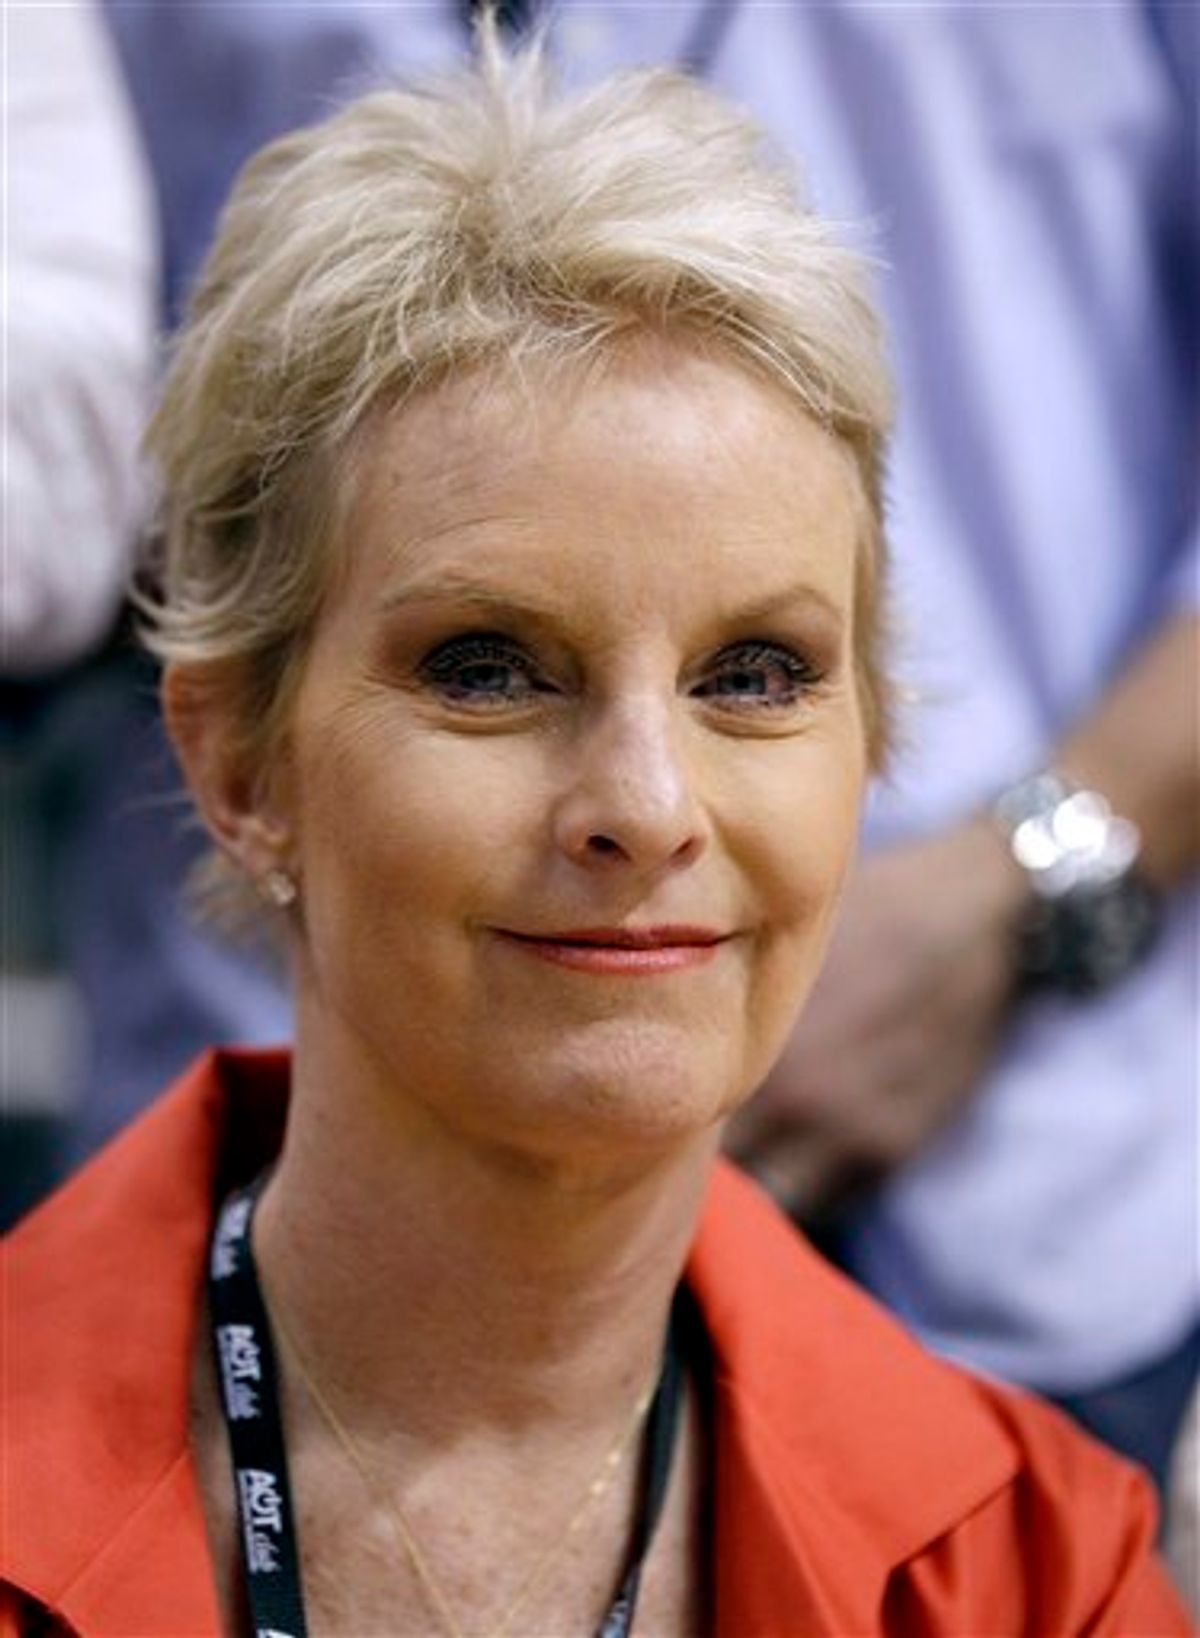 FILE - In this May 25, 2010 file photo, Cindy McCain, wife of Sen. John McCain, R-Ariz., is seen in Phoenix. McCain, the wife of 2008 Republican presidential nominee John McCain, is speaking out against the ban on gays serving openly in the military while her husband is working to maintain it. (AP Photo/Ross D. Franklin, File)    (AP)